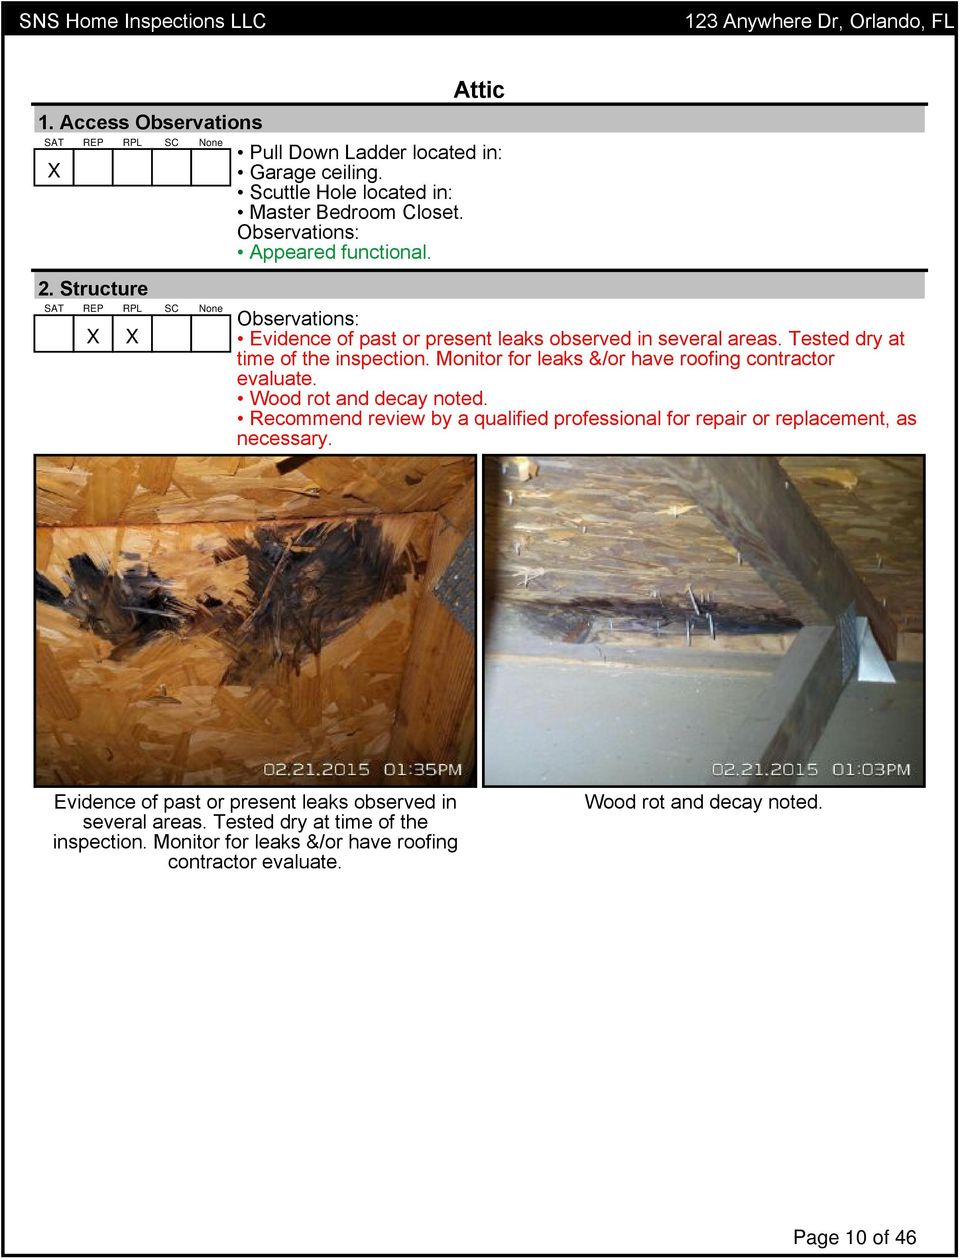 Monitor for leaks &/or have roofing contractor evaluate. Wood rot and decay noted.